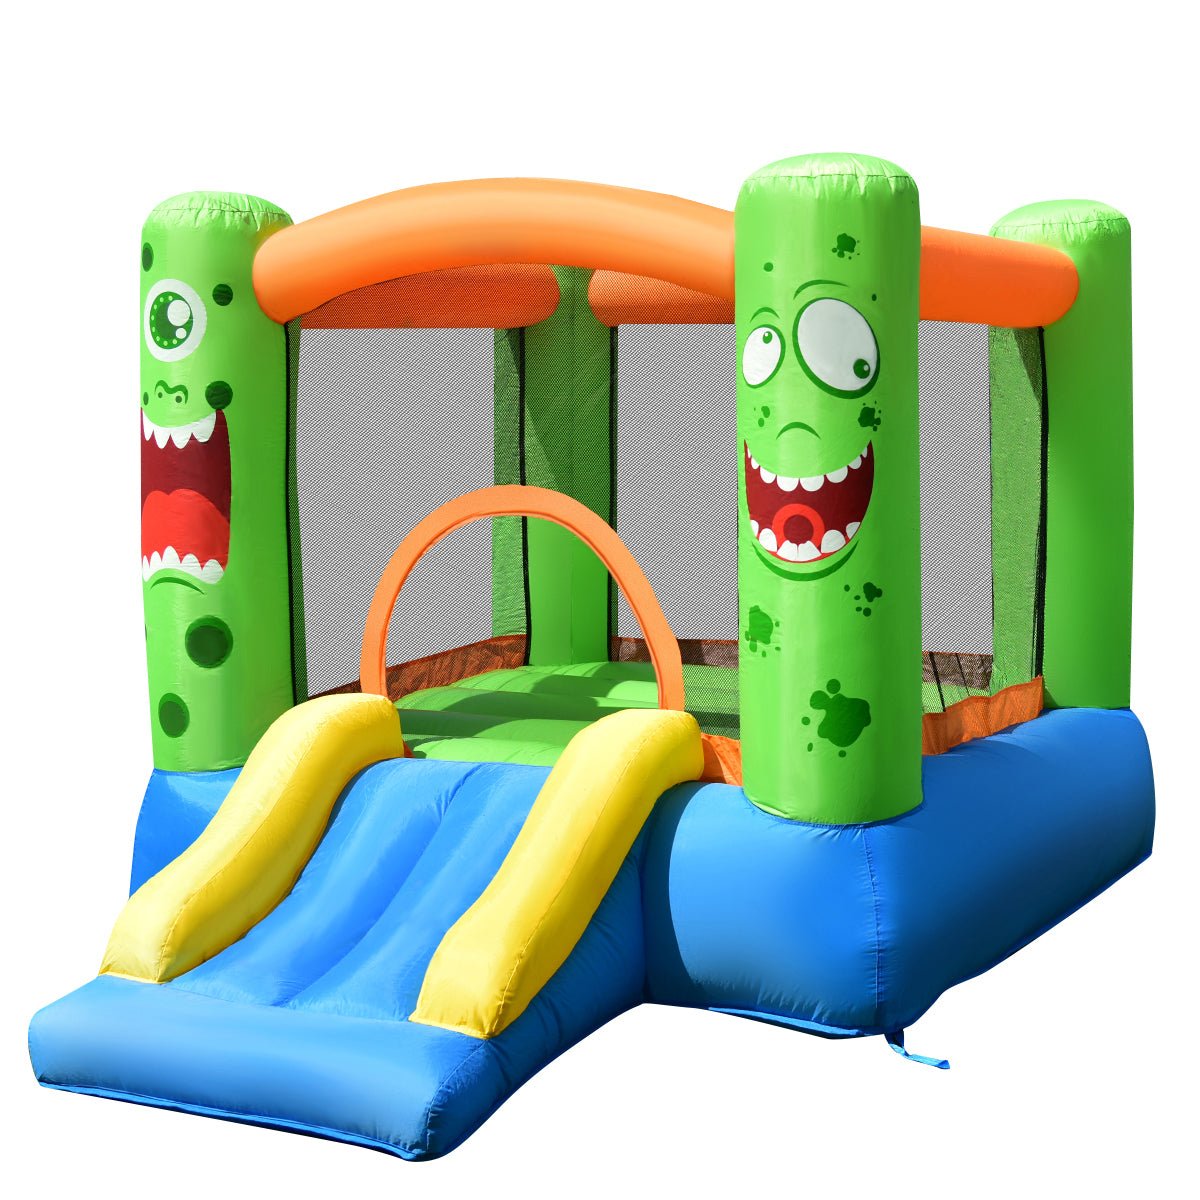 Wholesome Fun: Kids Inflatable Bounce Playhouse with Basketball & Slide